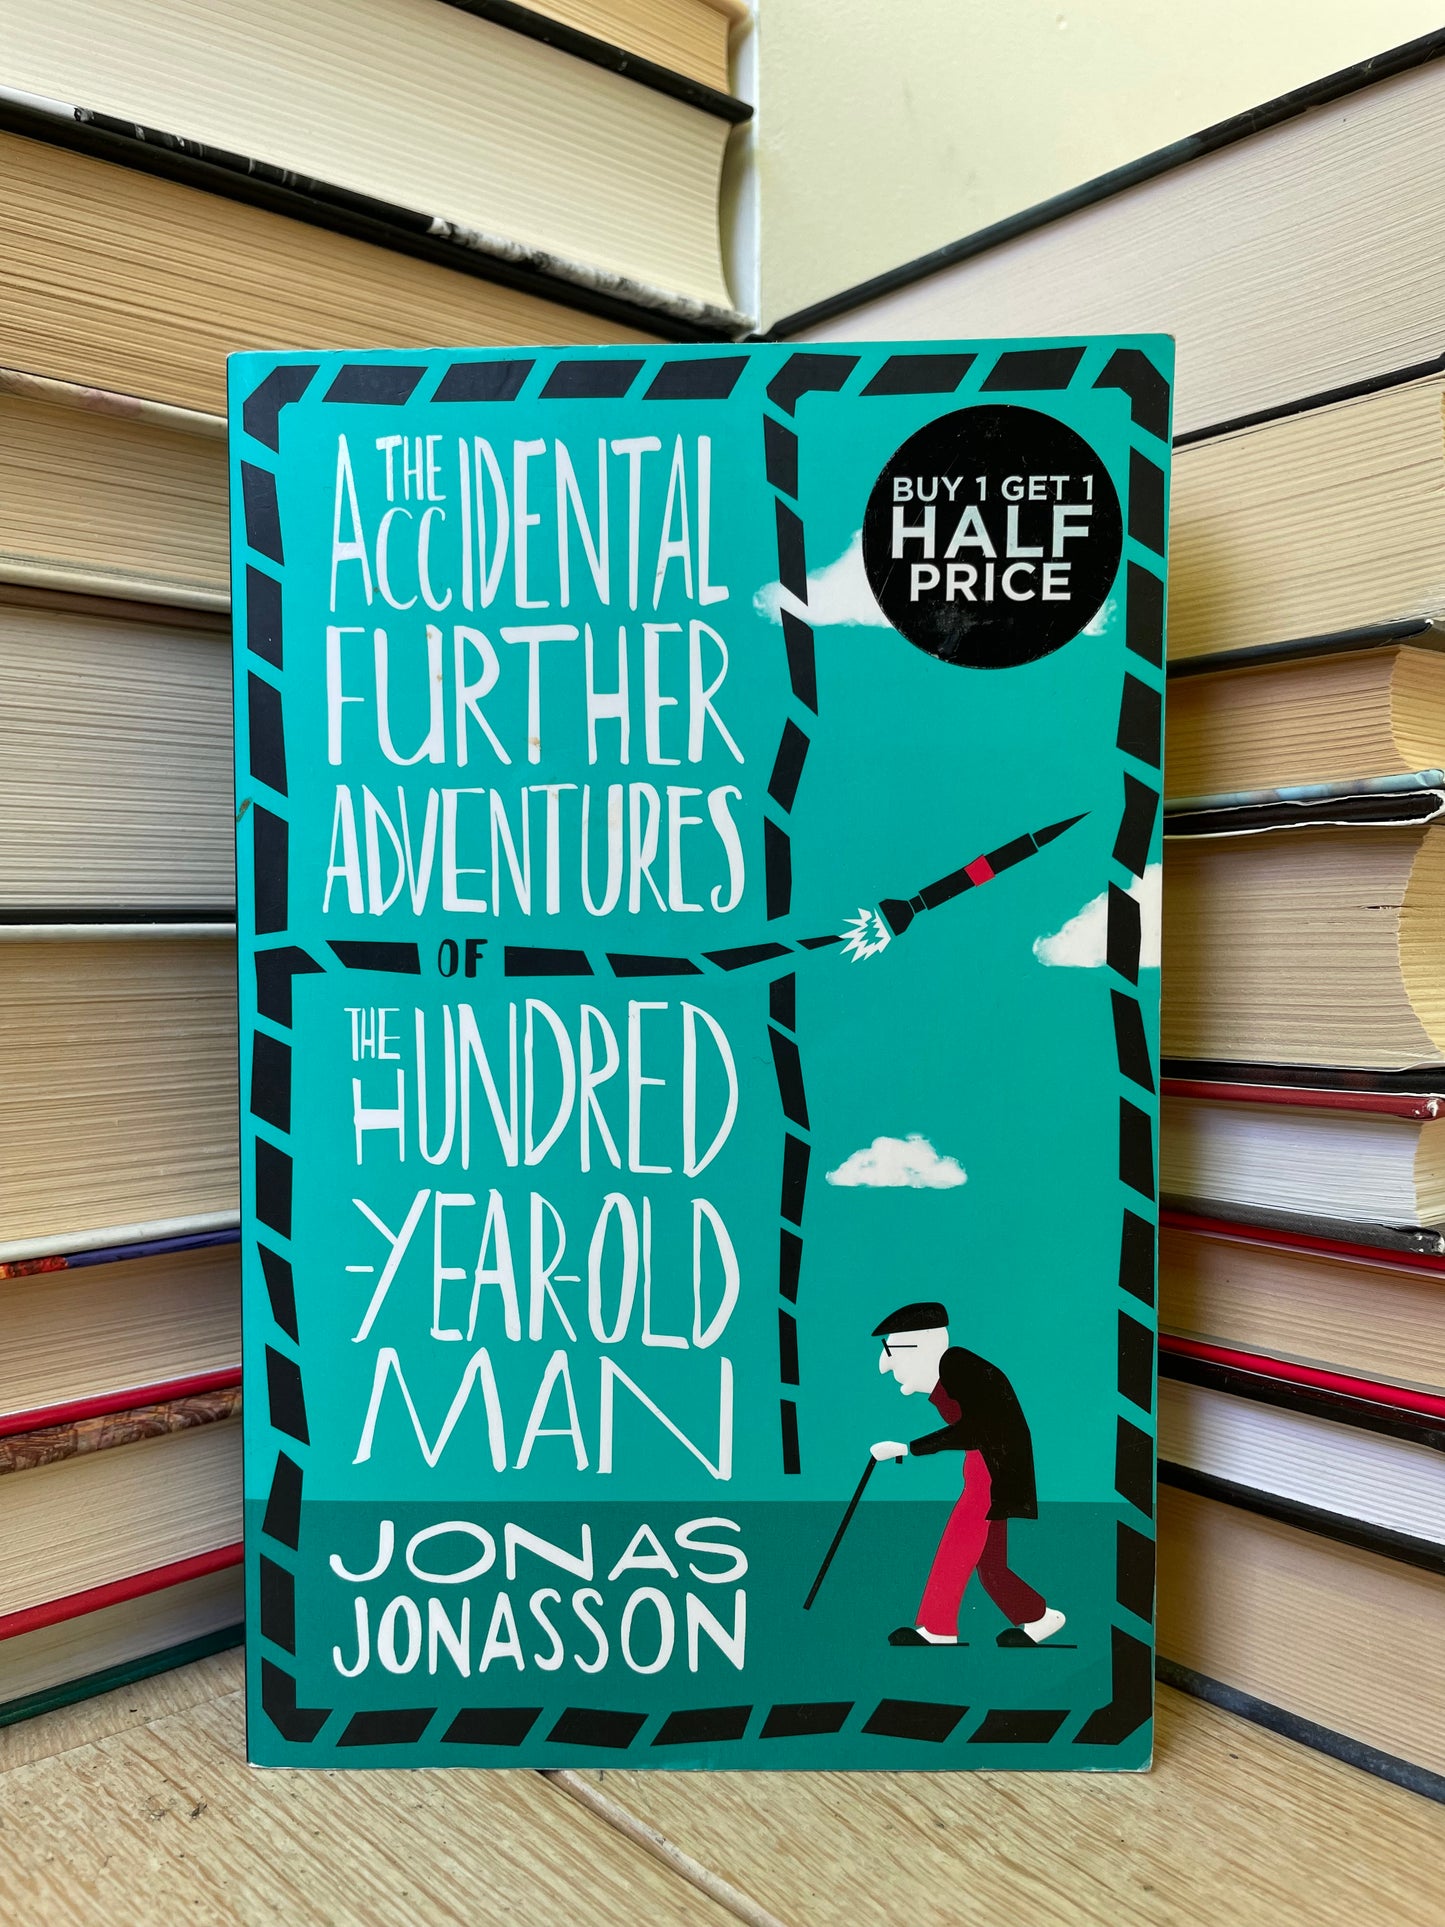 Jonas Jonasson - The Accidental Further Adventures of the Hundred-Year-Old Man